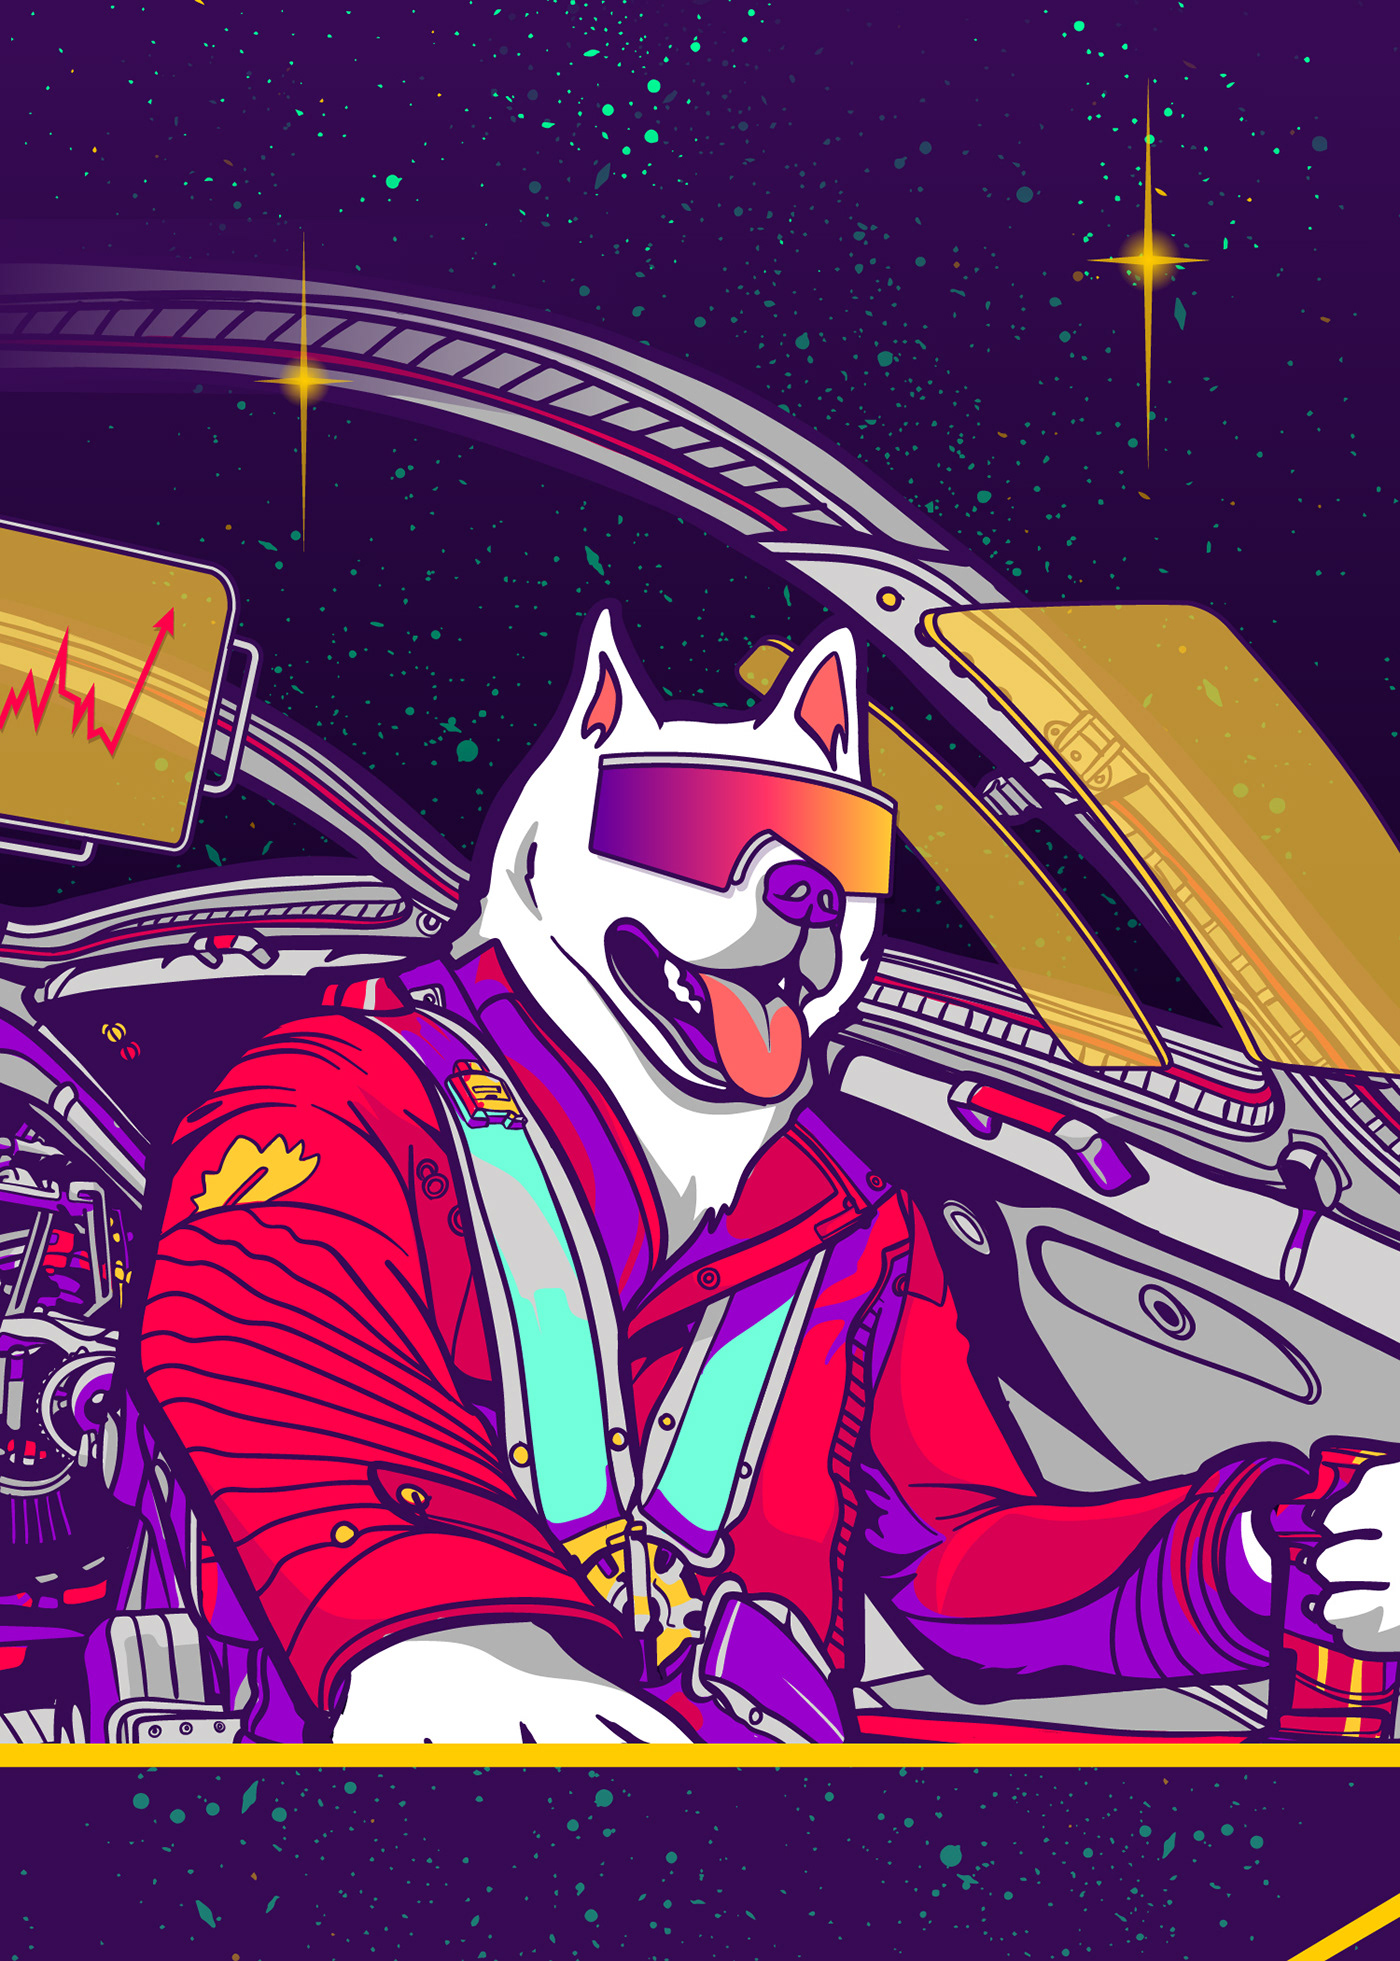 bitcoin crypto currency guardians hodl ILLUSTRATION  Jejudoge moon social media Space 